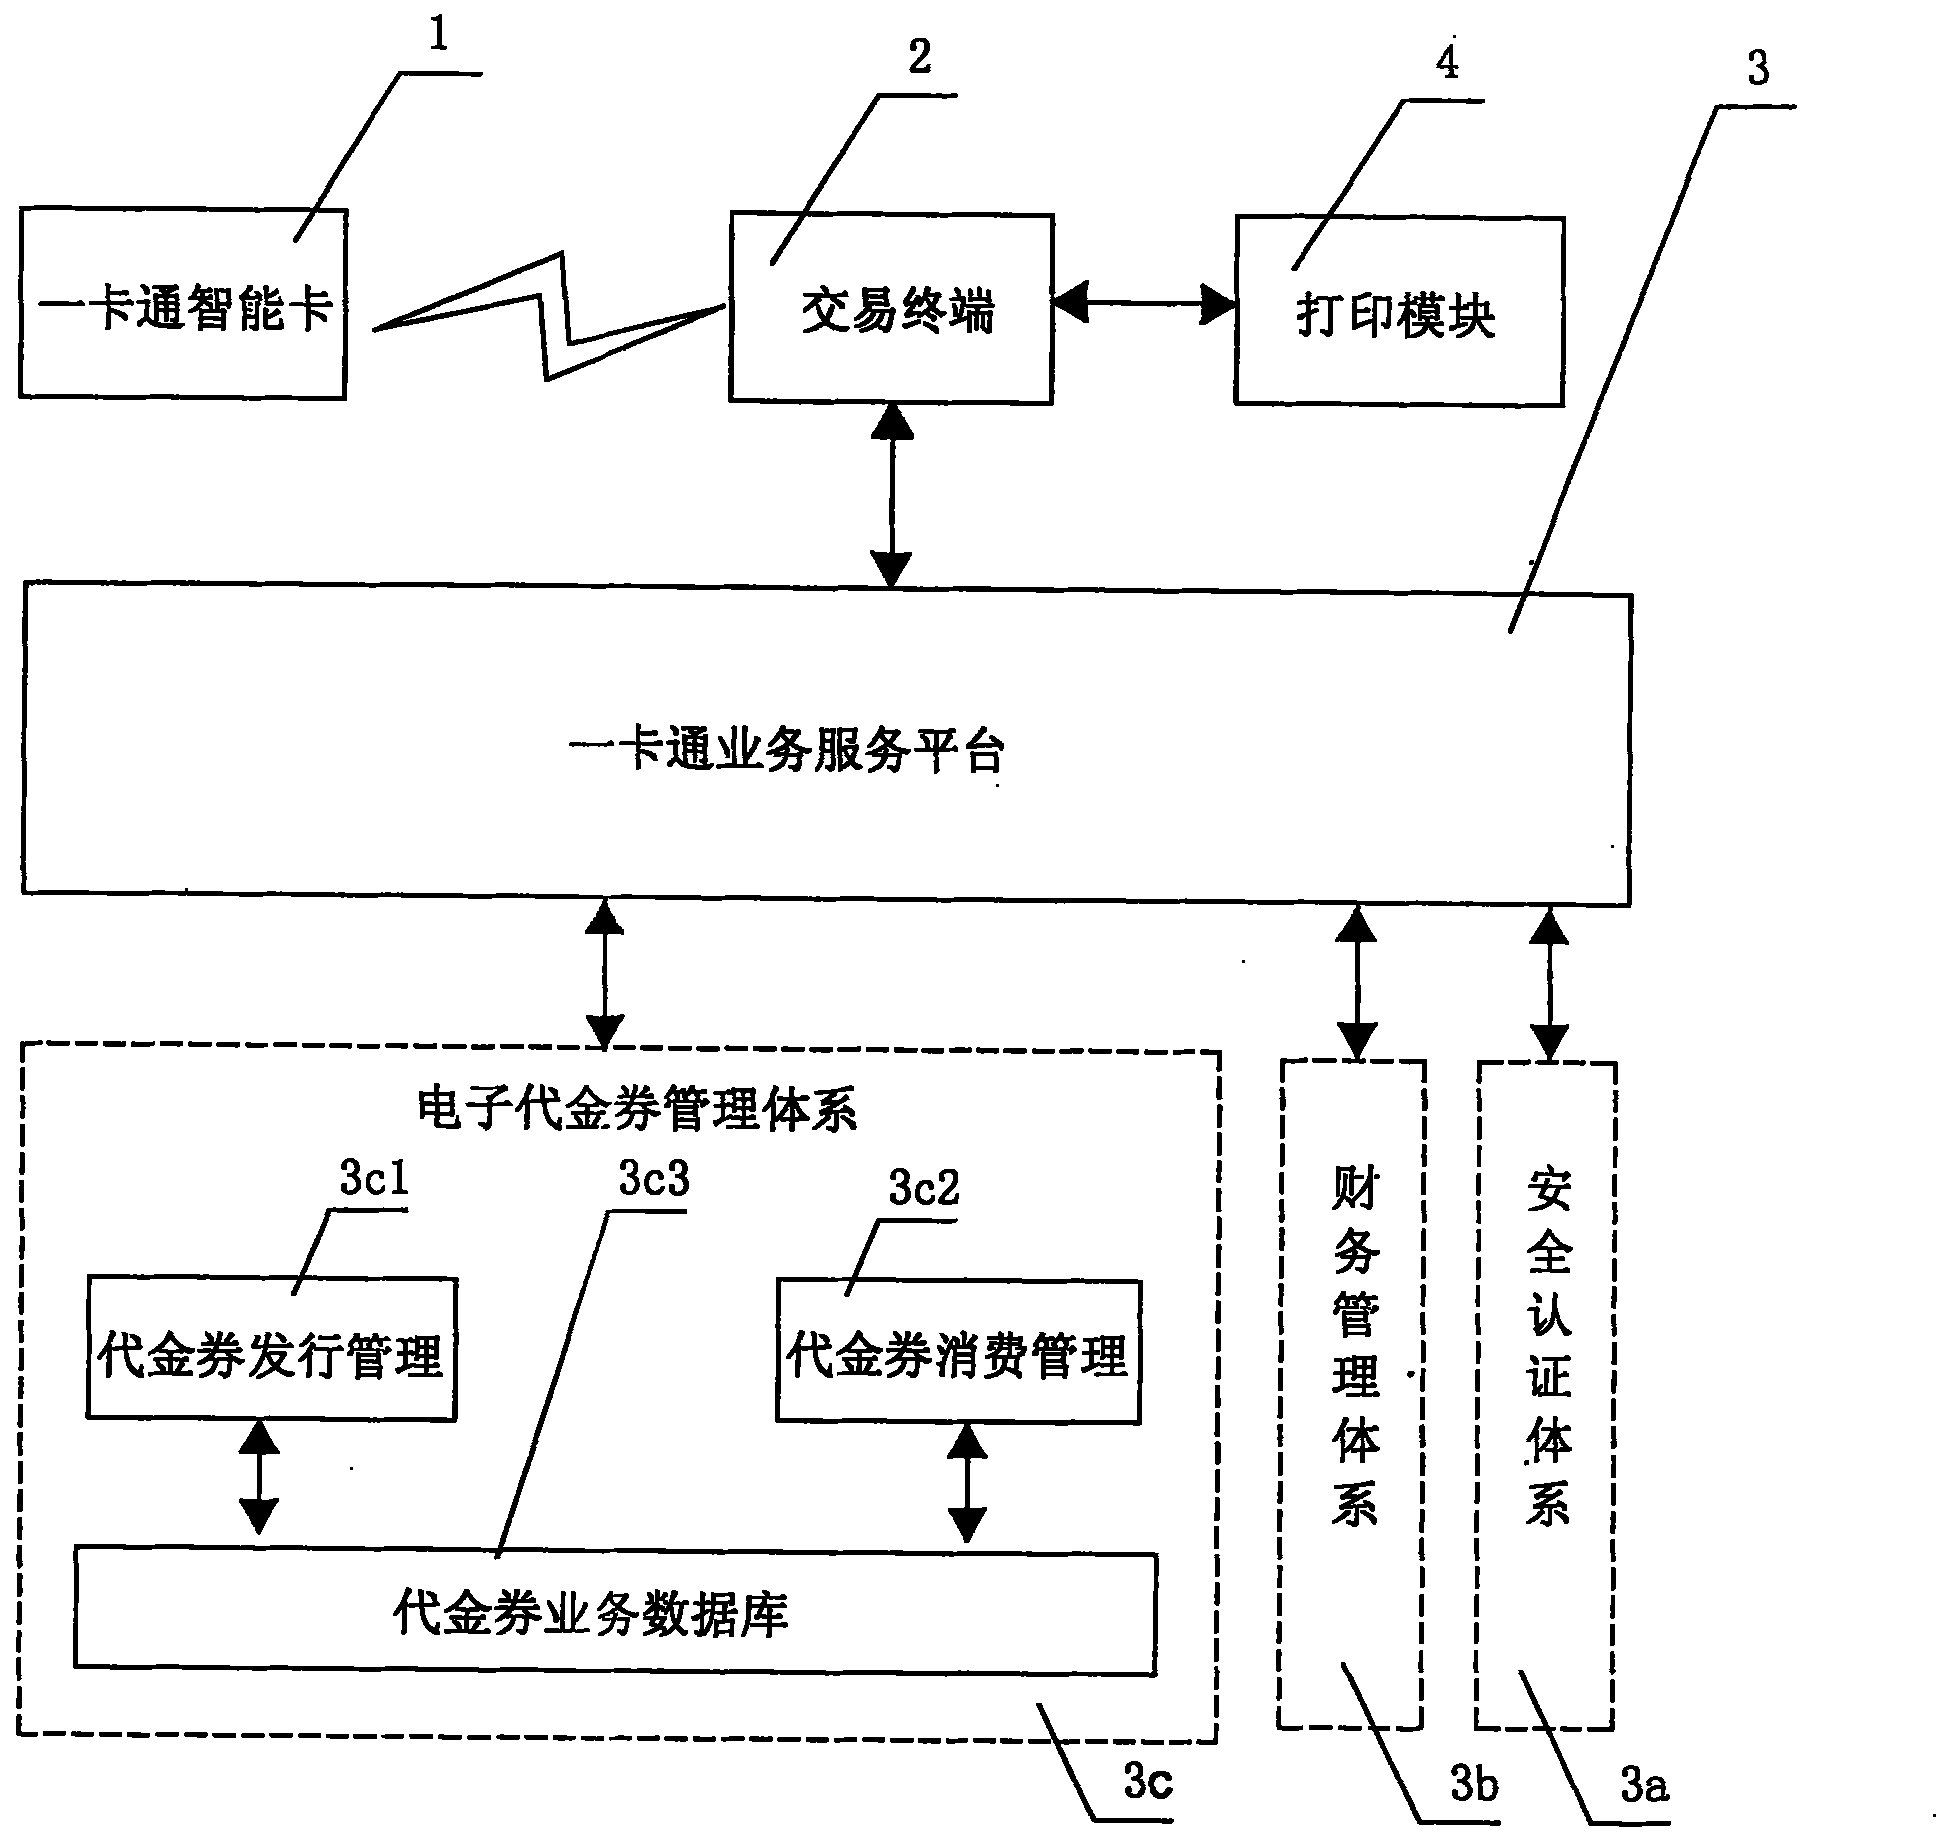 Electronic voucher purchase and payment system and method based on all-in-one card platform